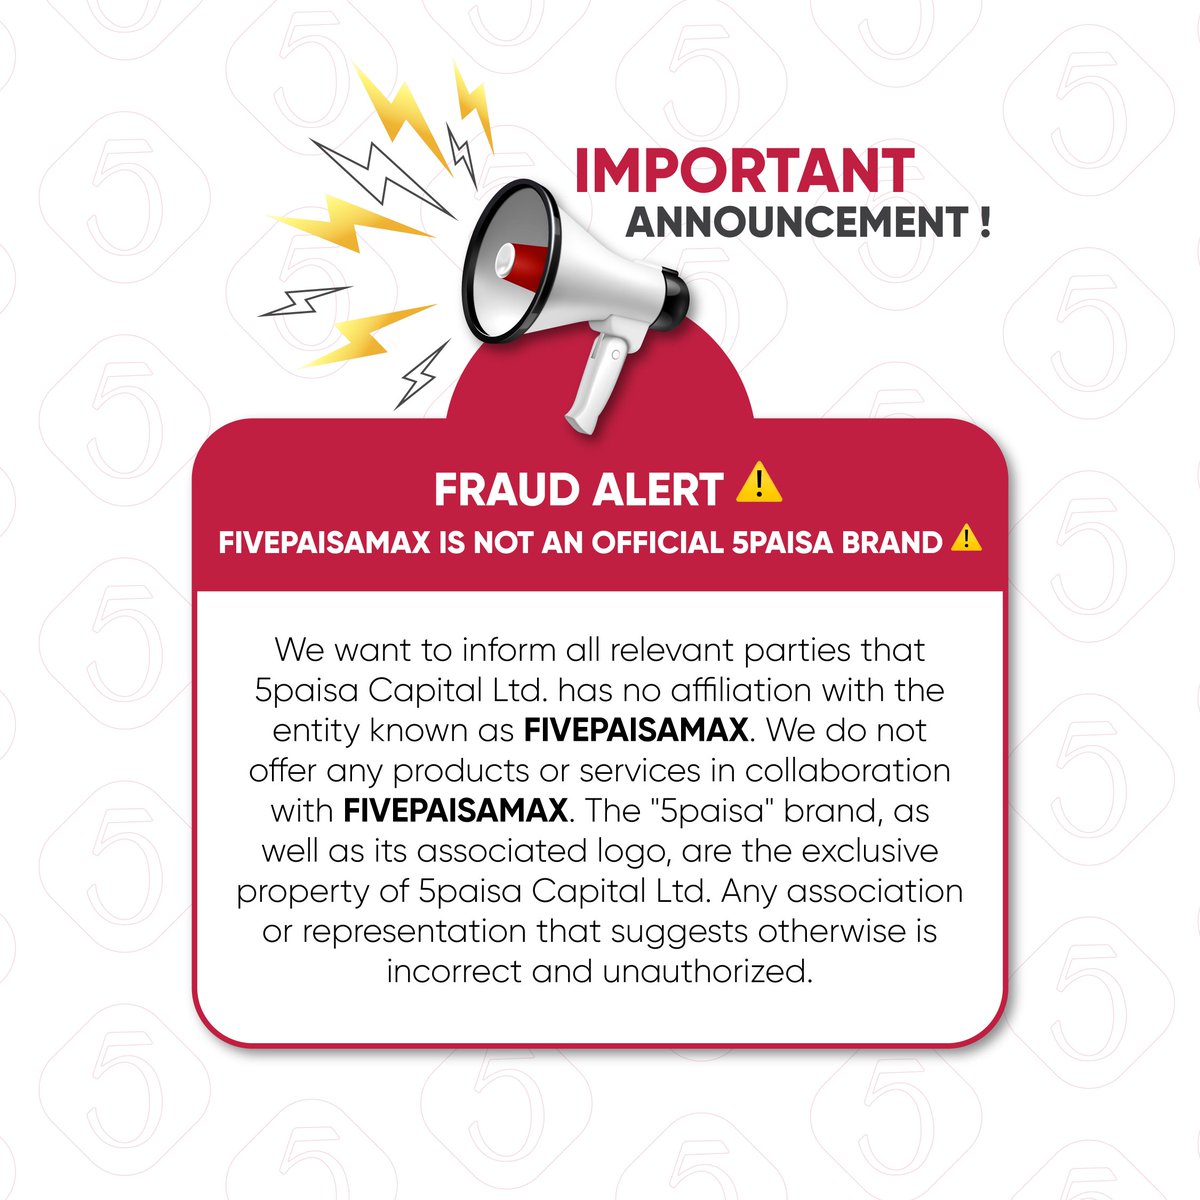 At 5paisa, the safety and security of our customers is our utmost priority. We urge that you all stay vigilant against such fraudulent activities.

#StayVigilant #StaySafe